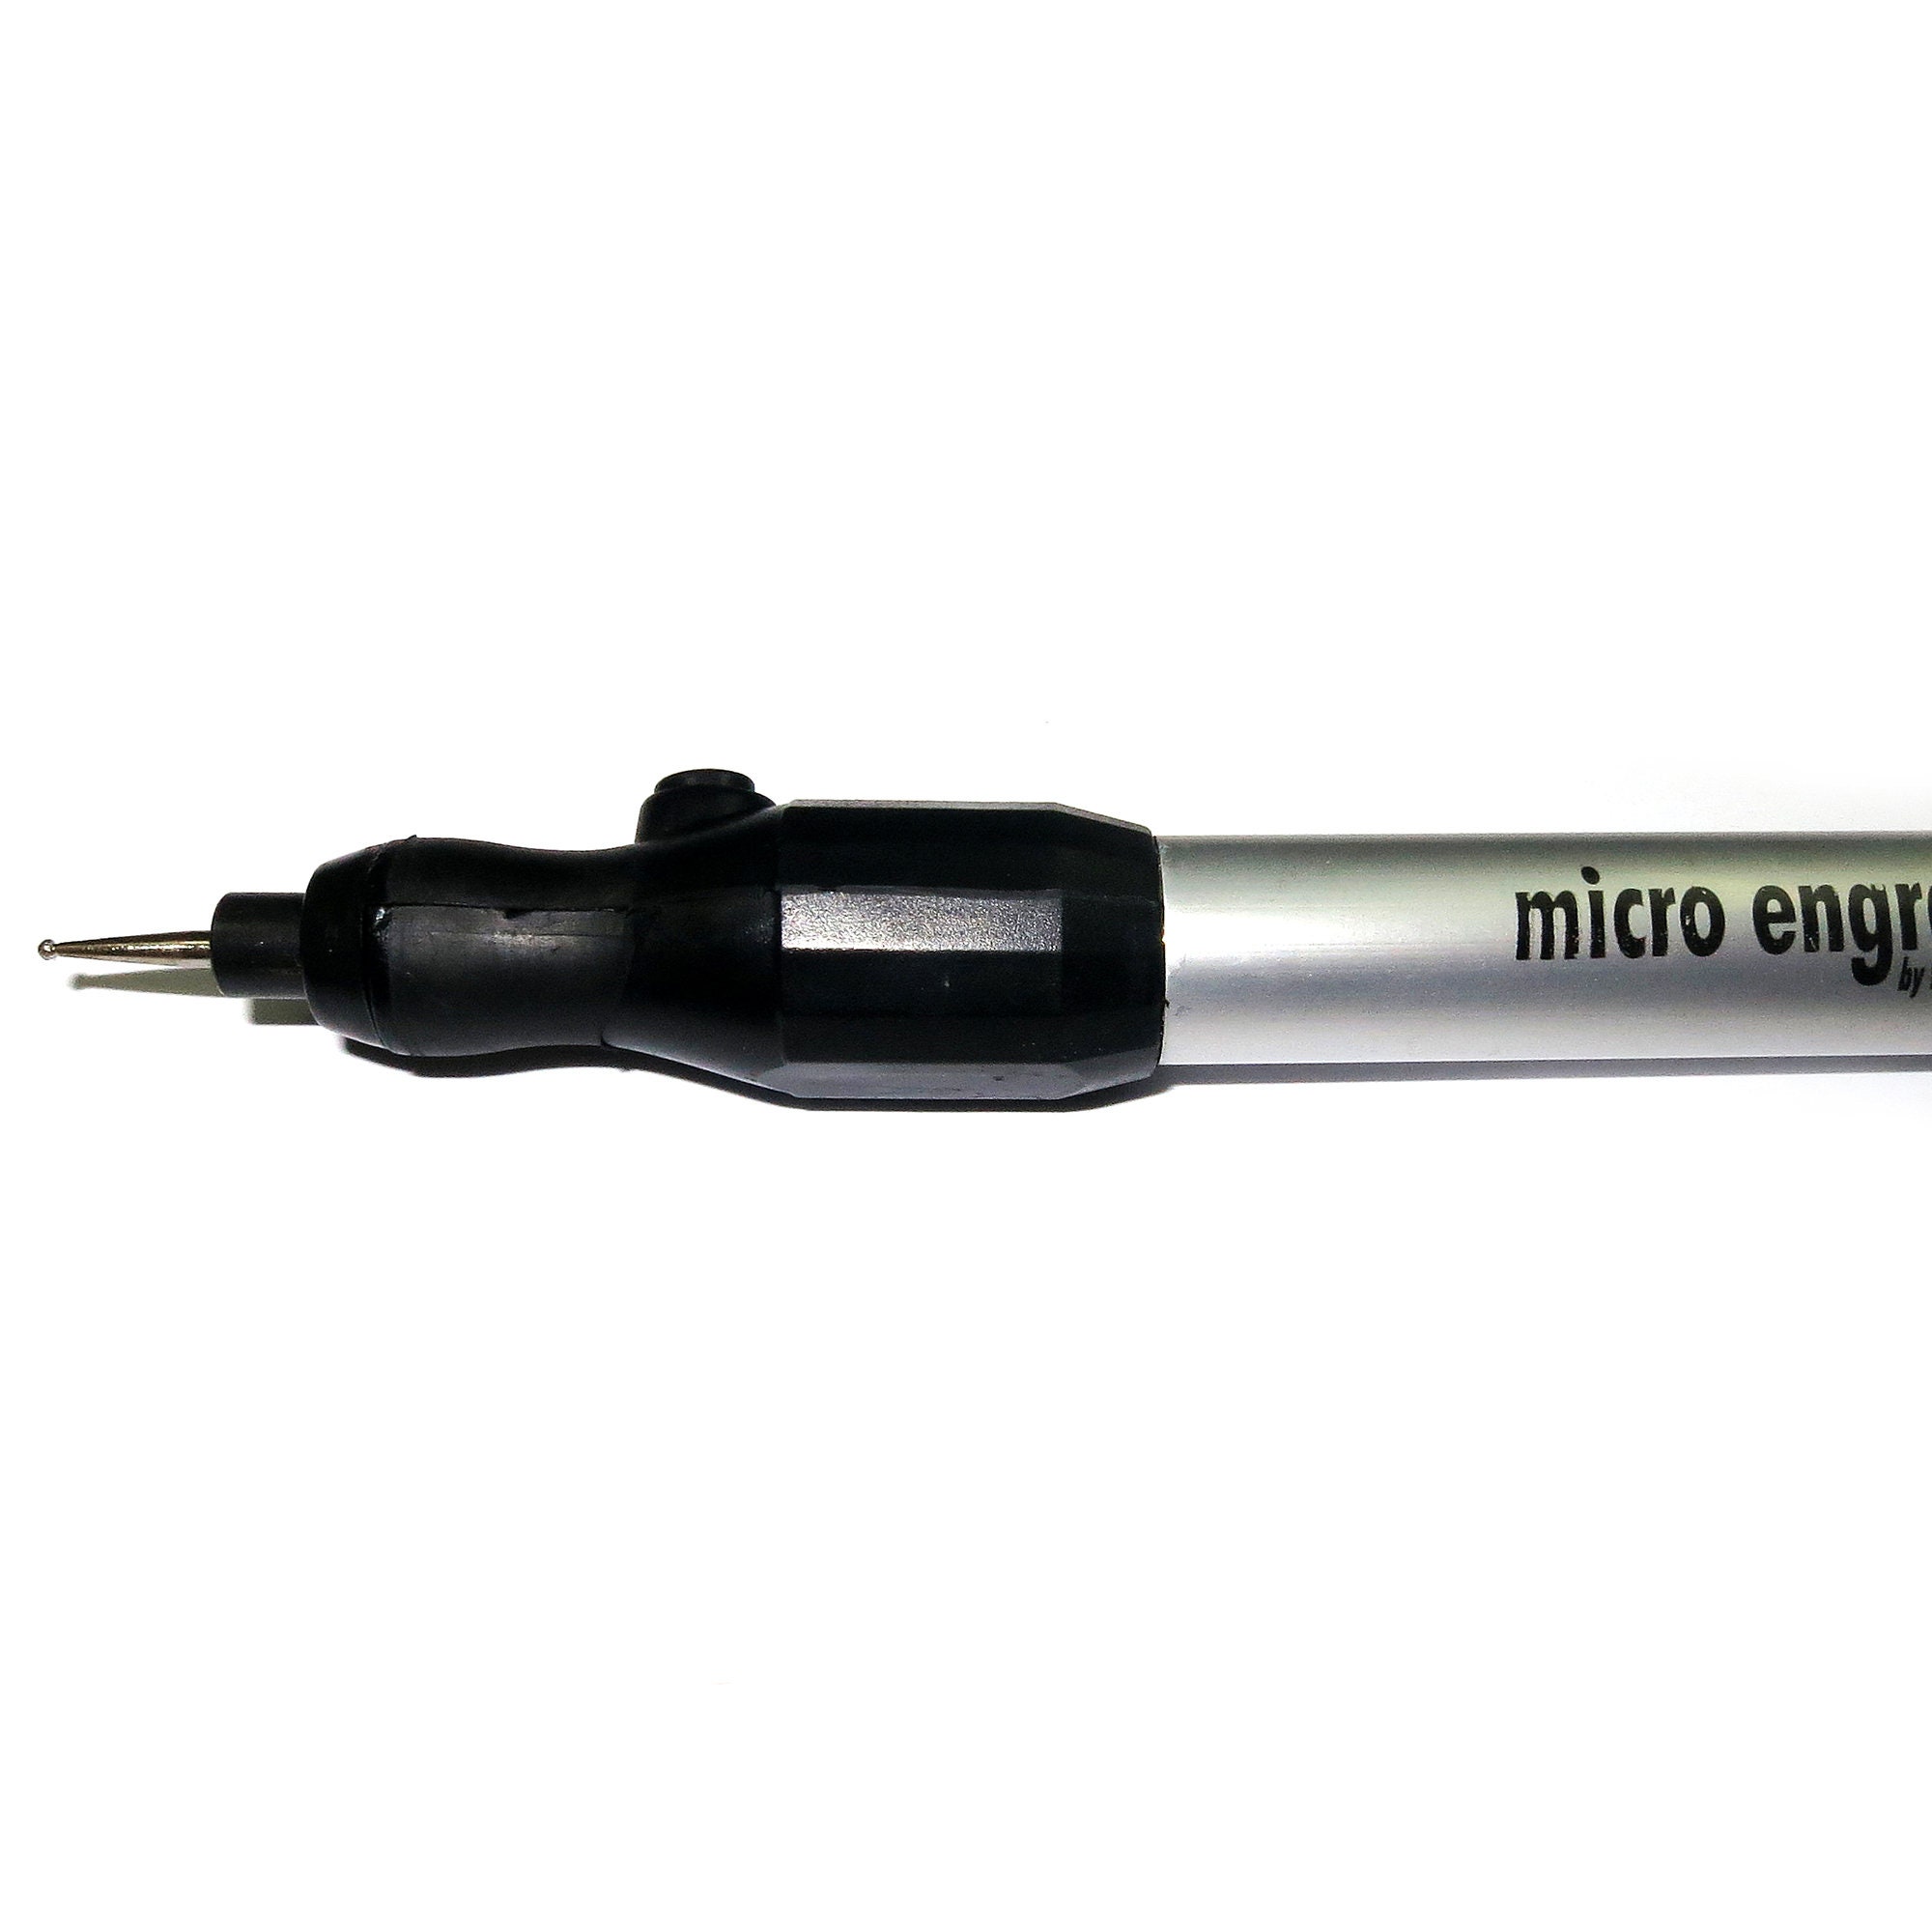 Micro Engraver Pen Electric Engraving Carve Tool for Jewelry Metal